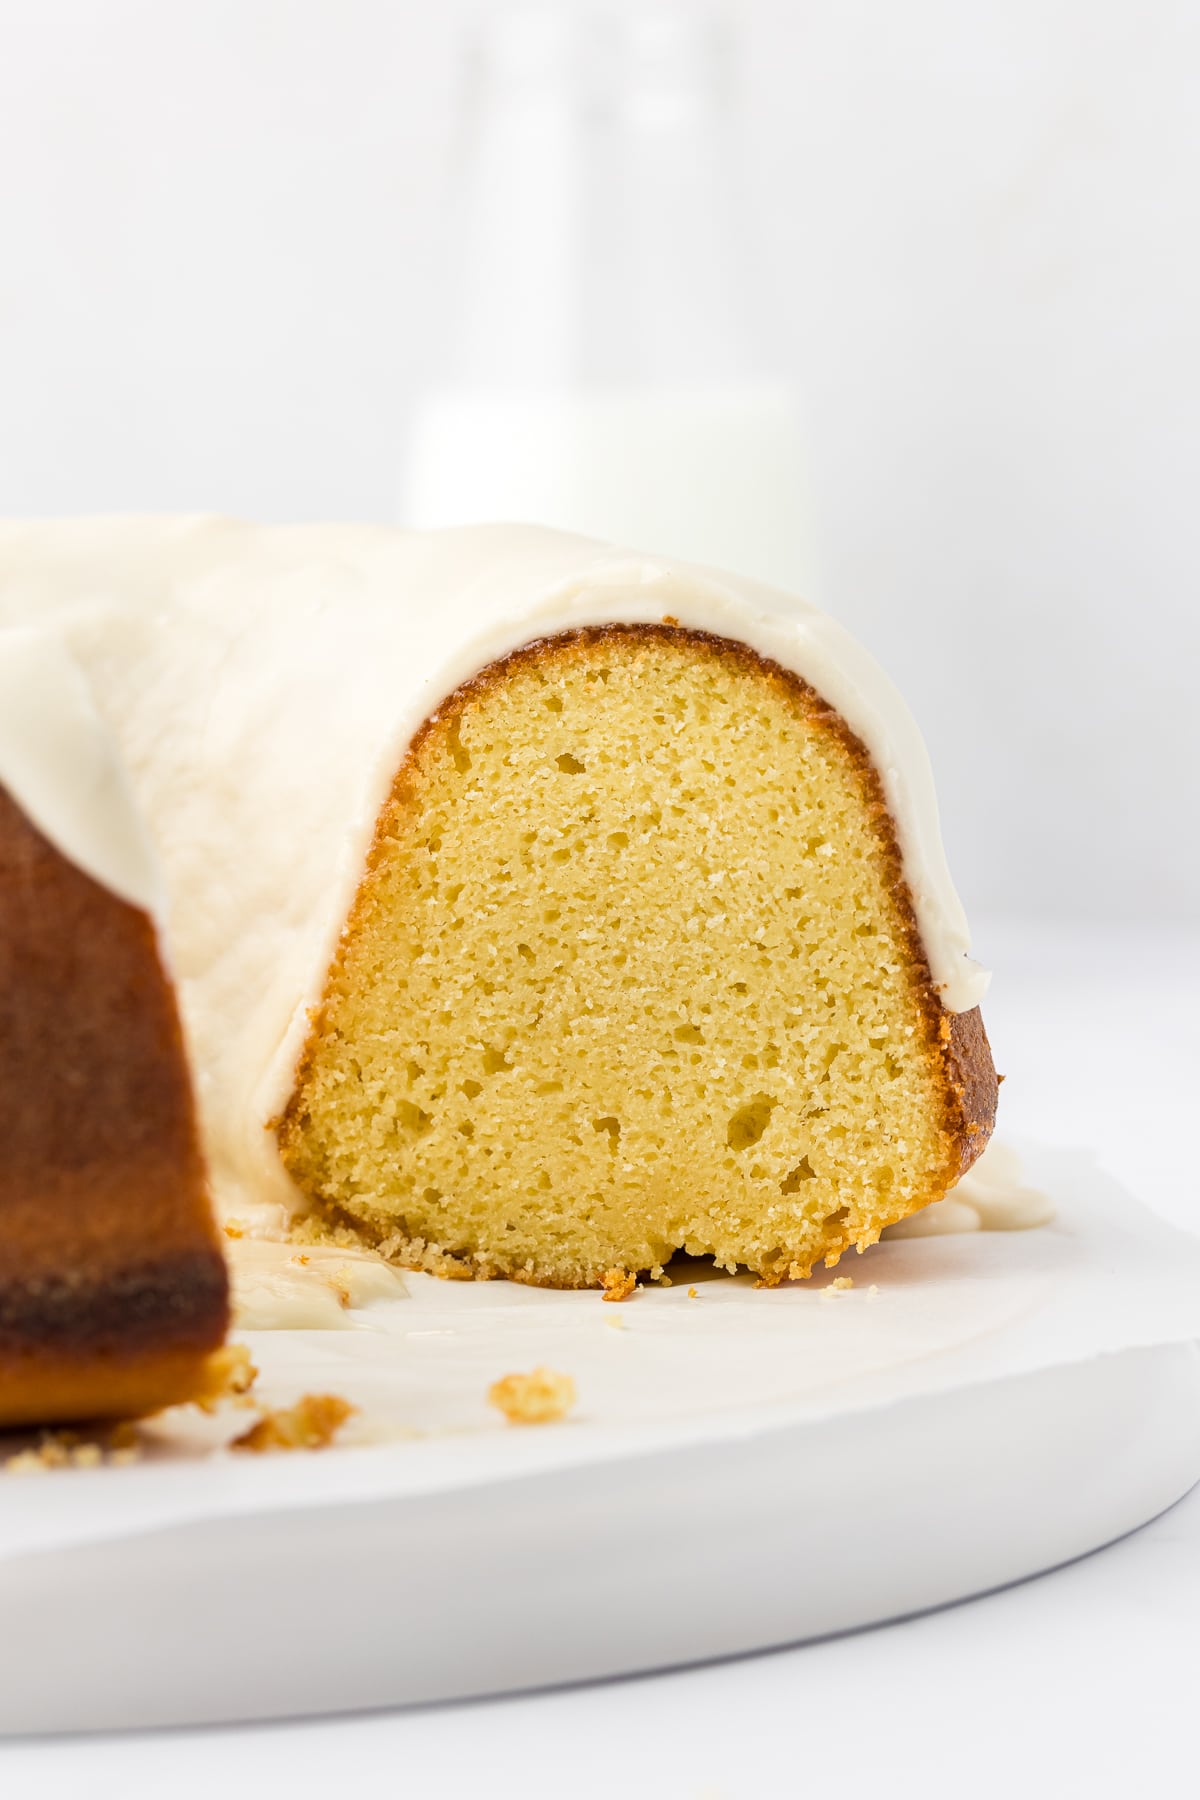 side view of a vanilla bundt cake with slices missing, exposing the inside of the cake with the glaze layer on top